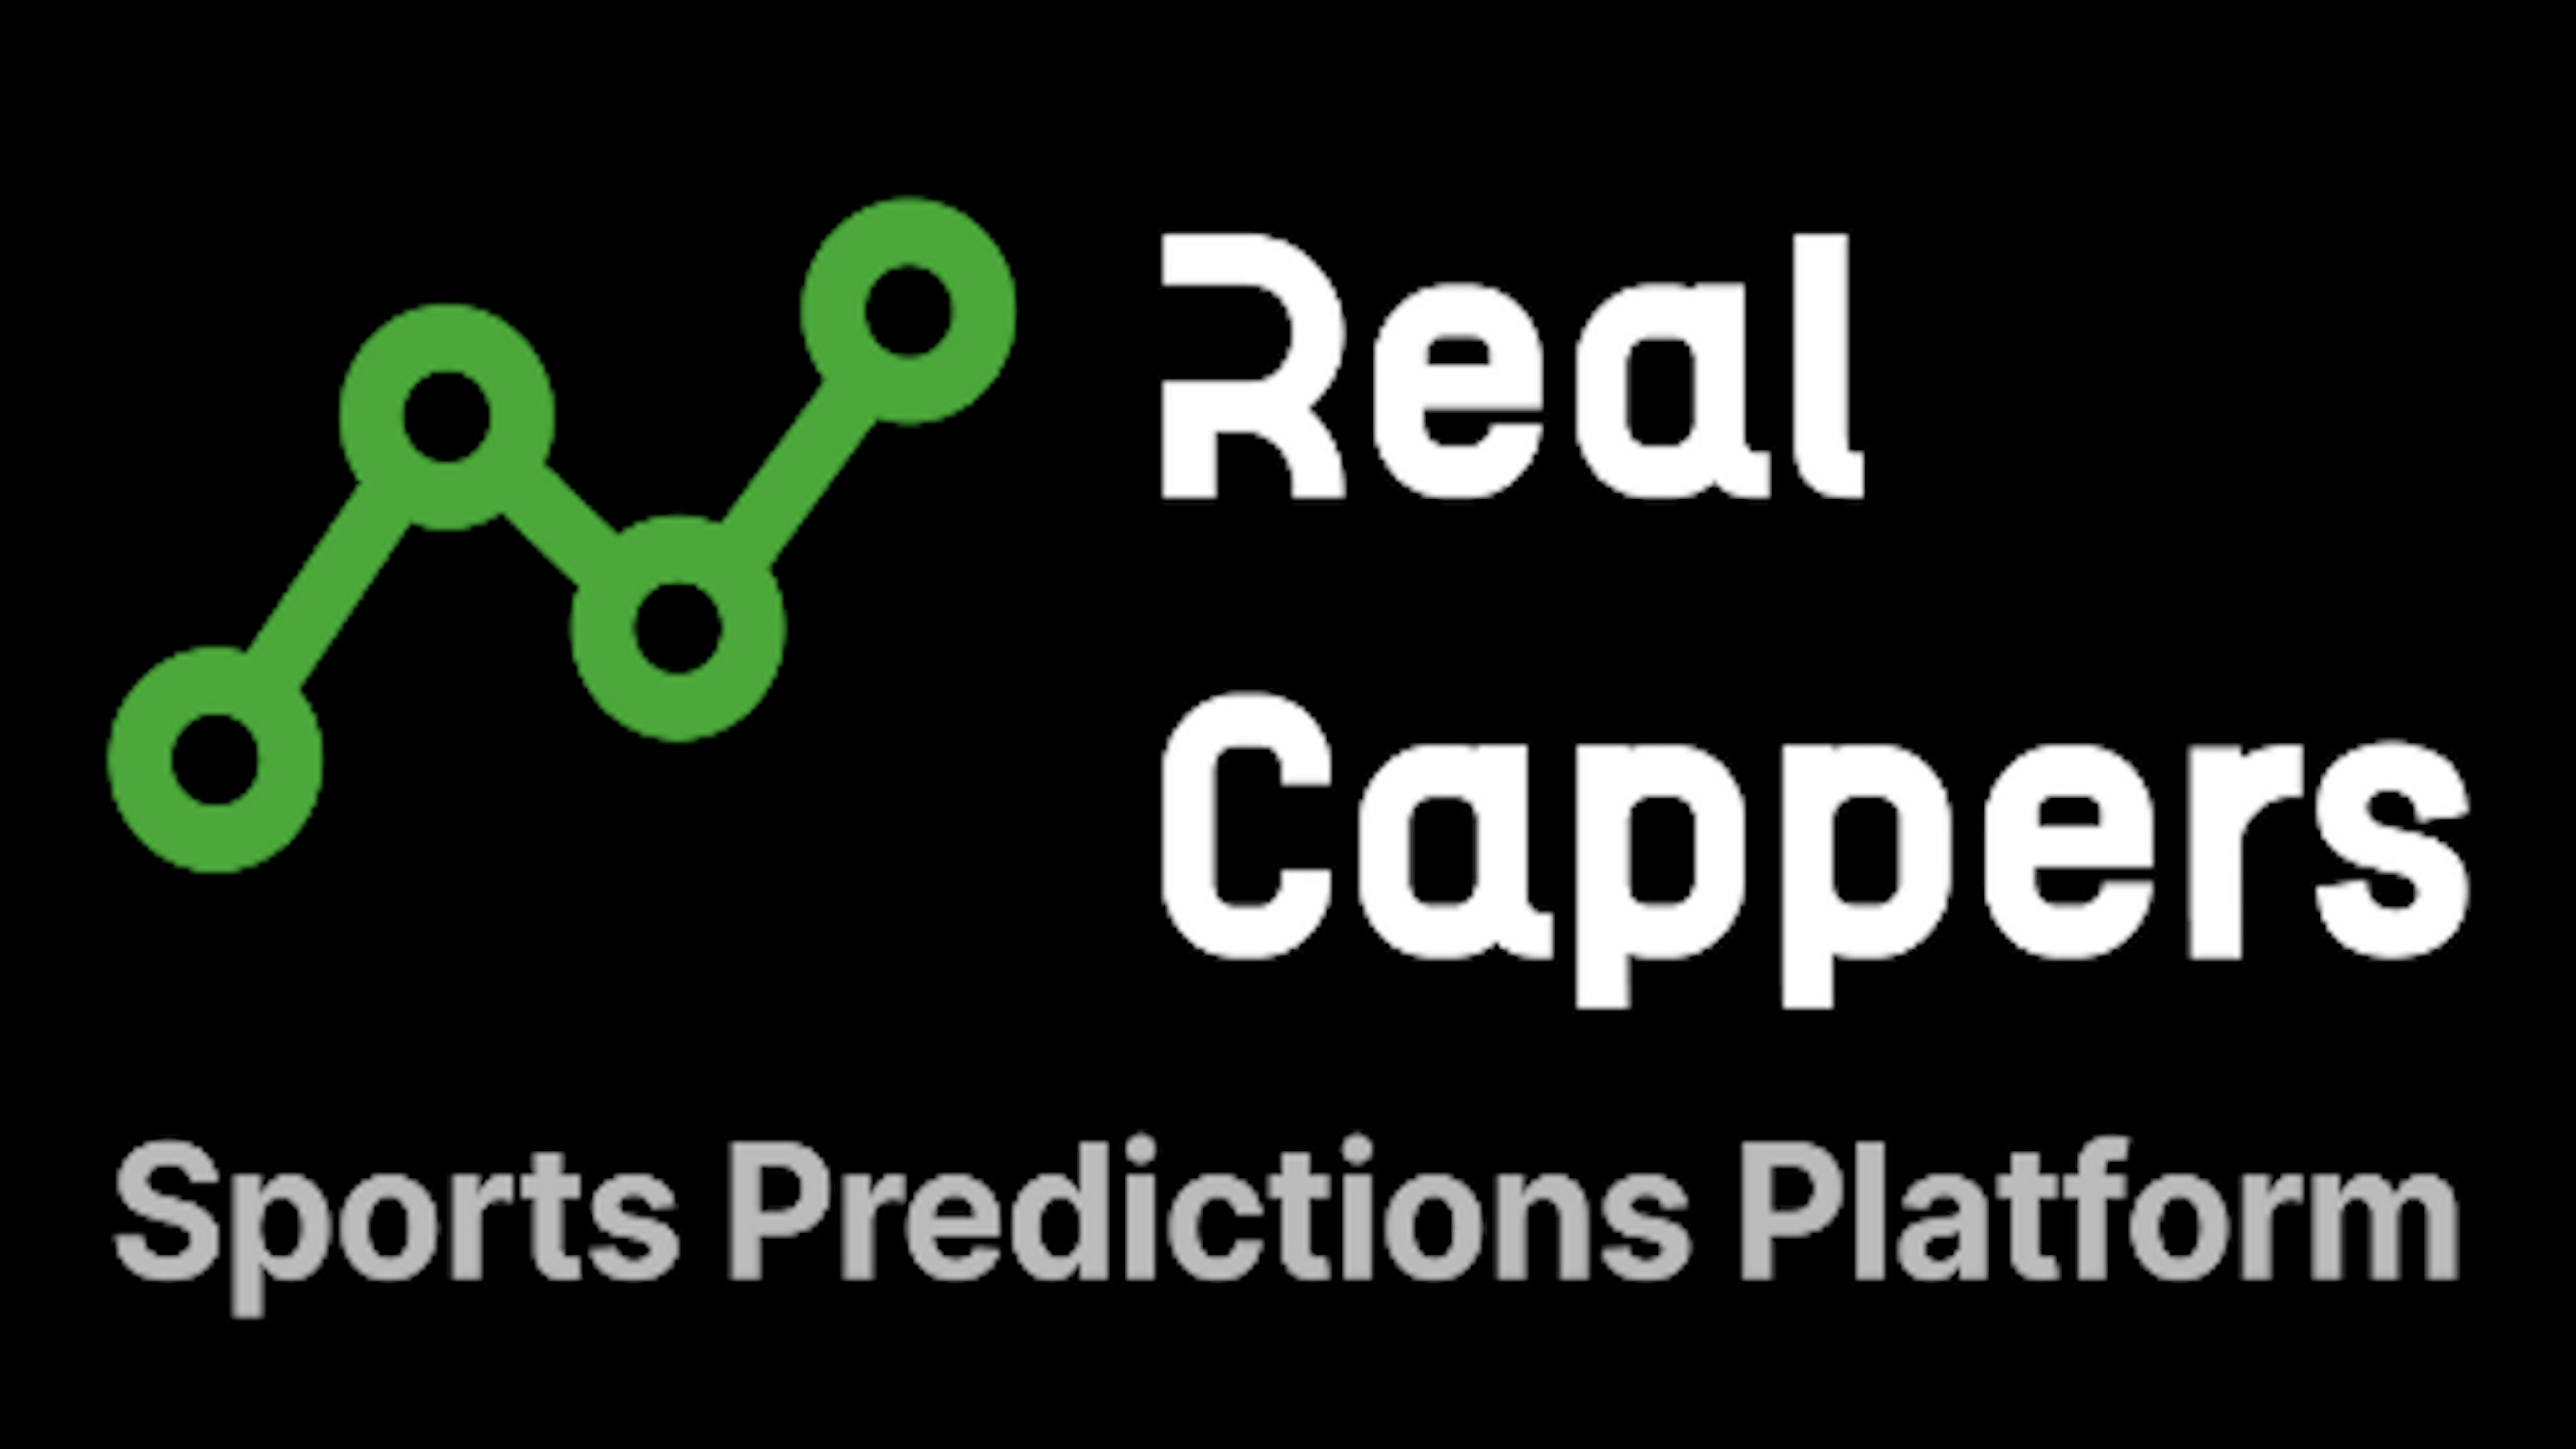 RealCappers.com Revolutionizes UFC and MMA Fan Engagement with Innovative Mobile App